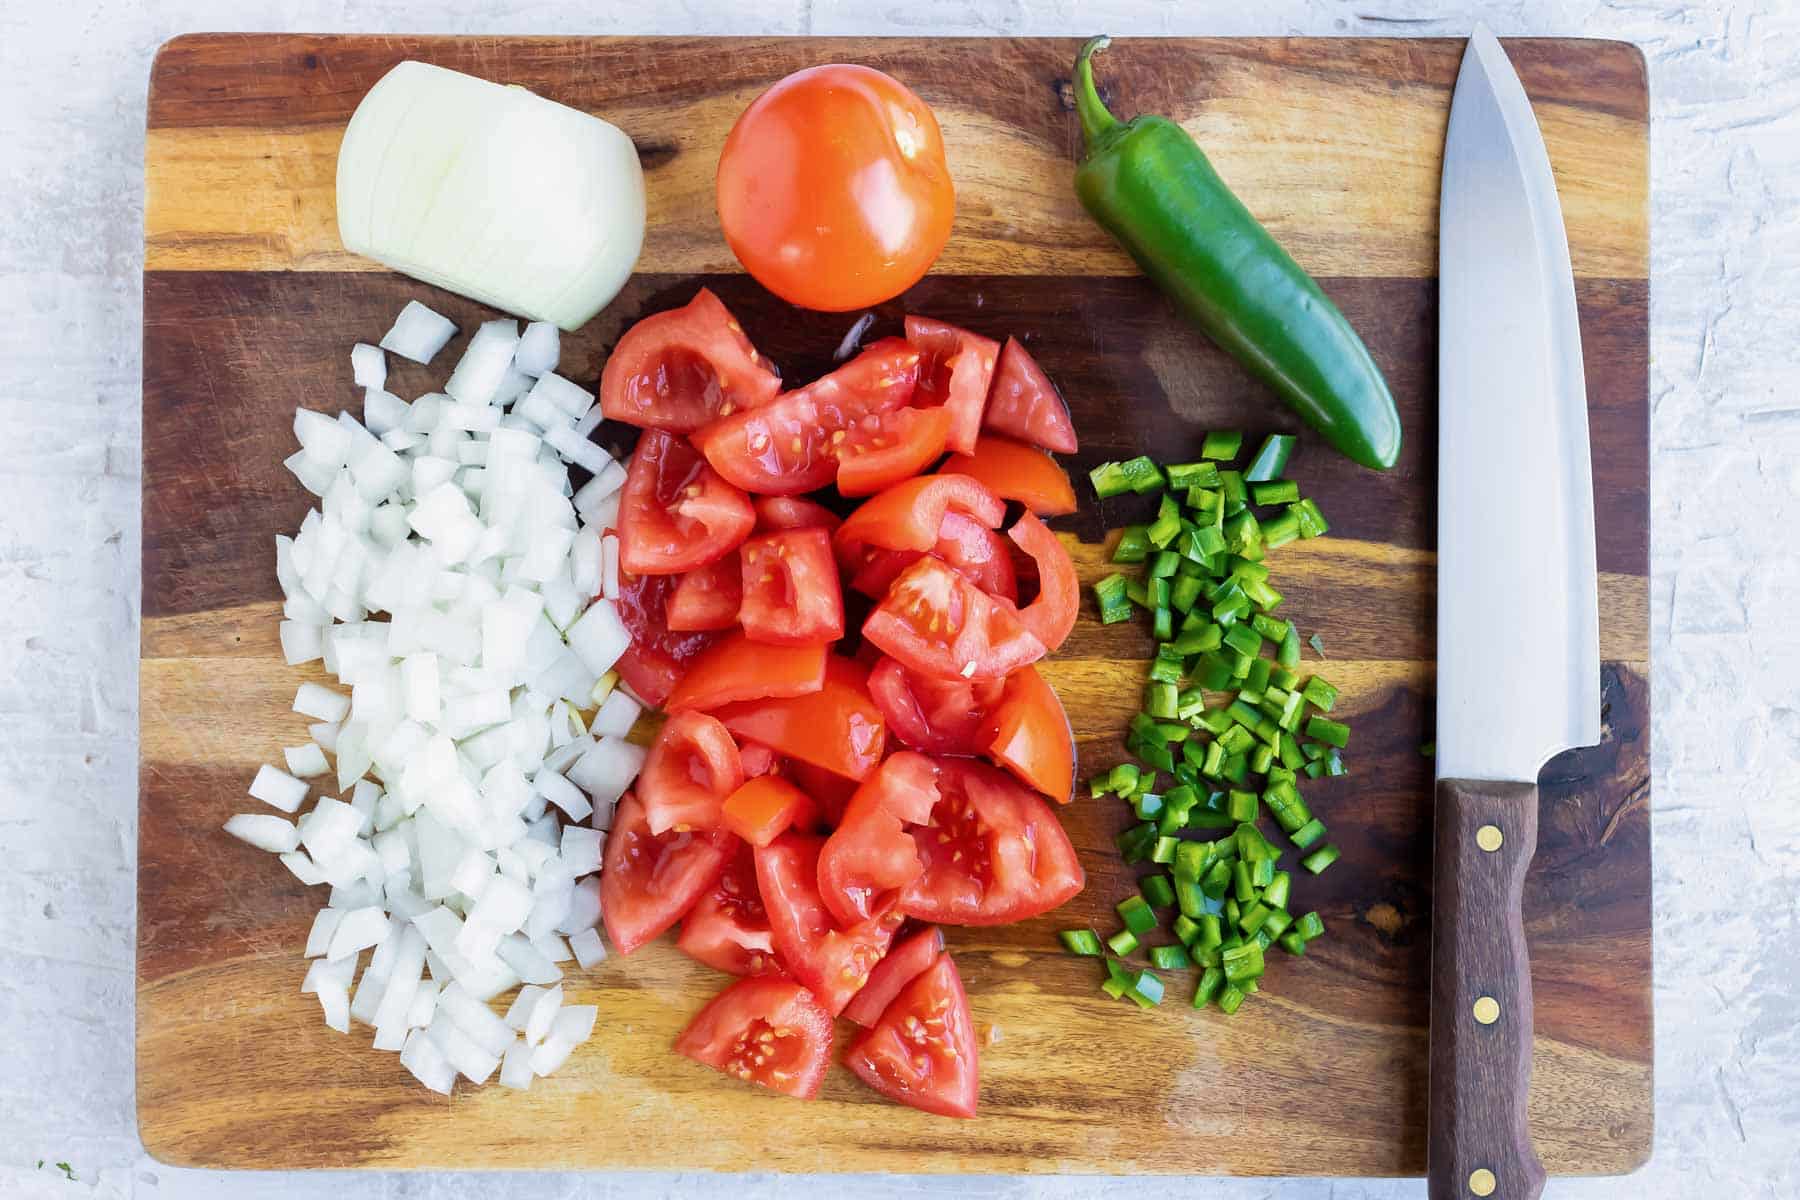 Diced onion, fresh tomatoes, and jalapenos that are chopped on a wooden cutting board.